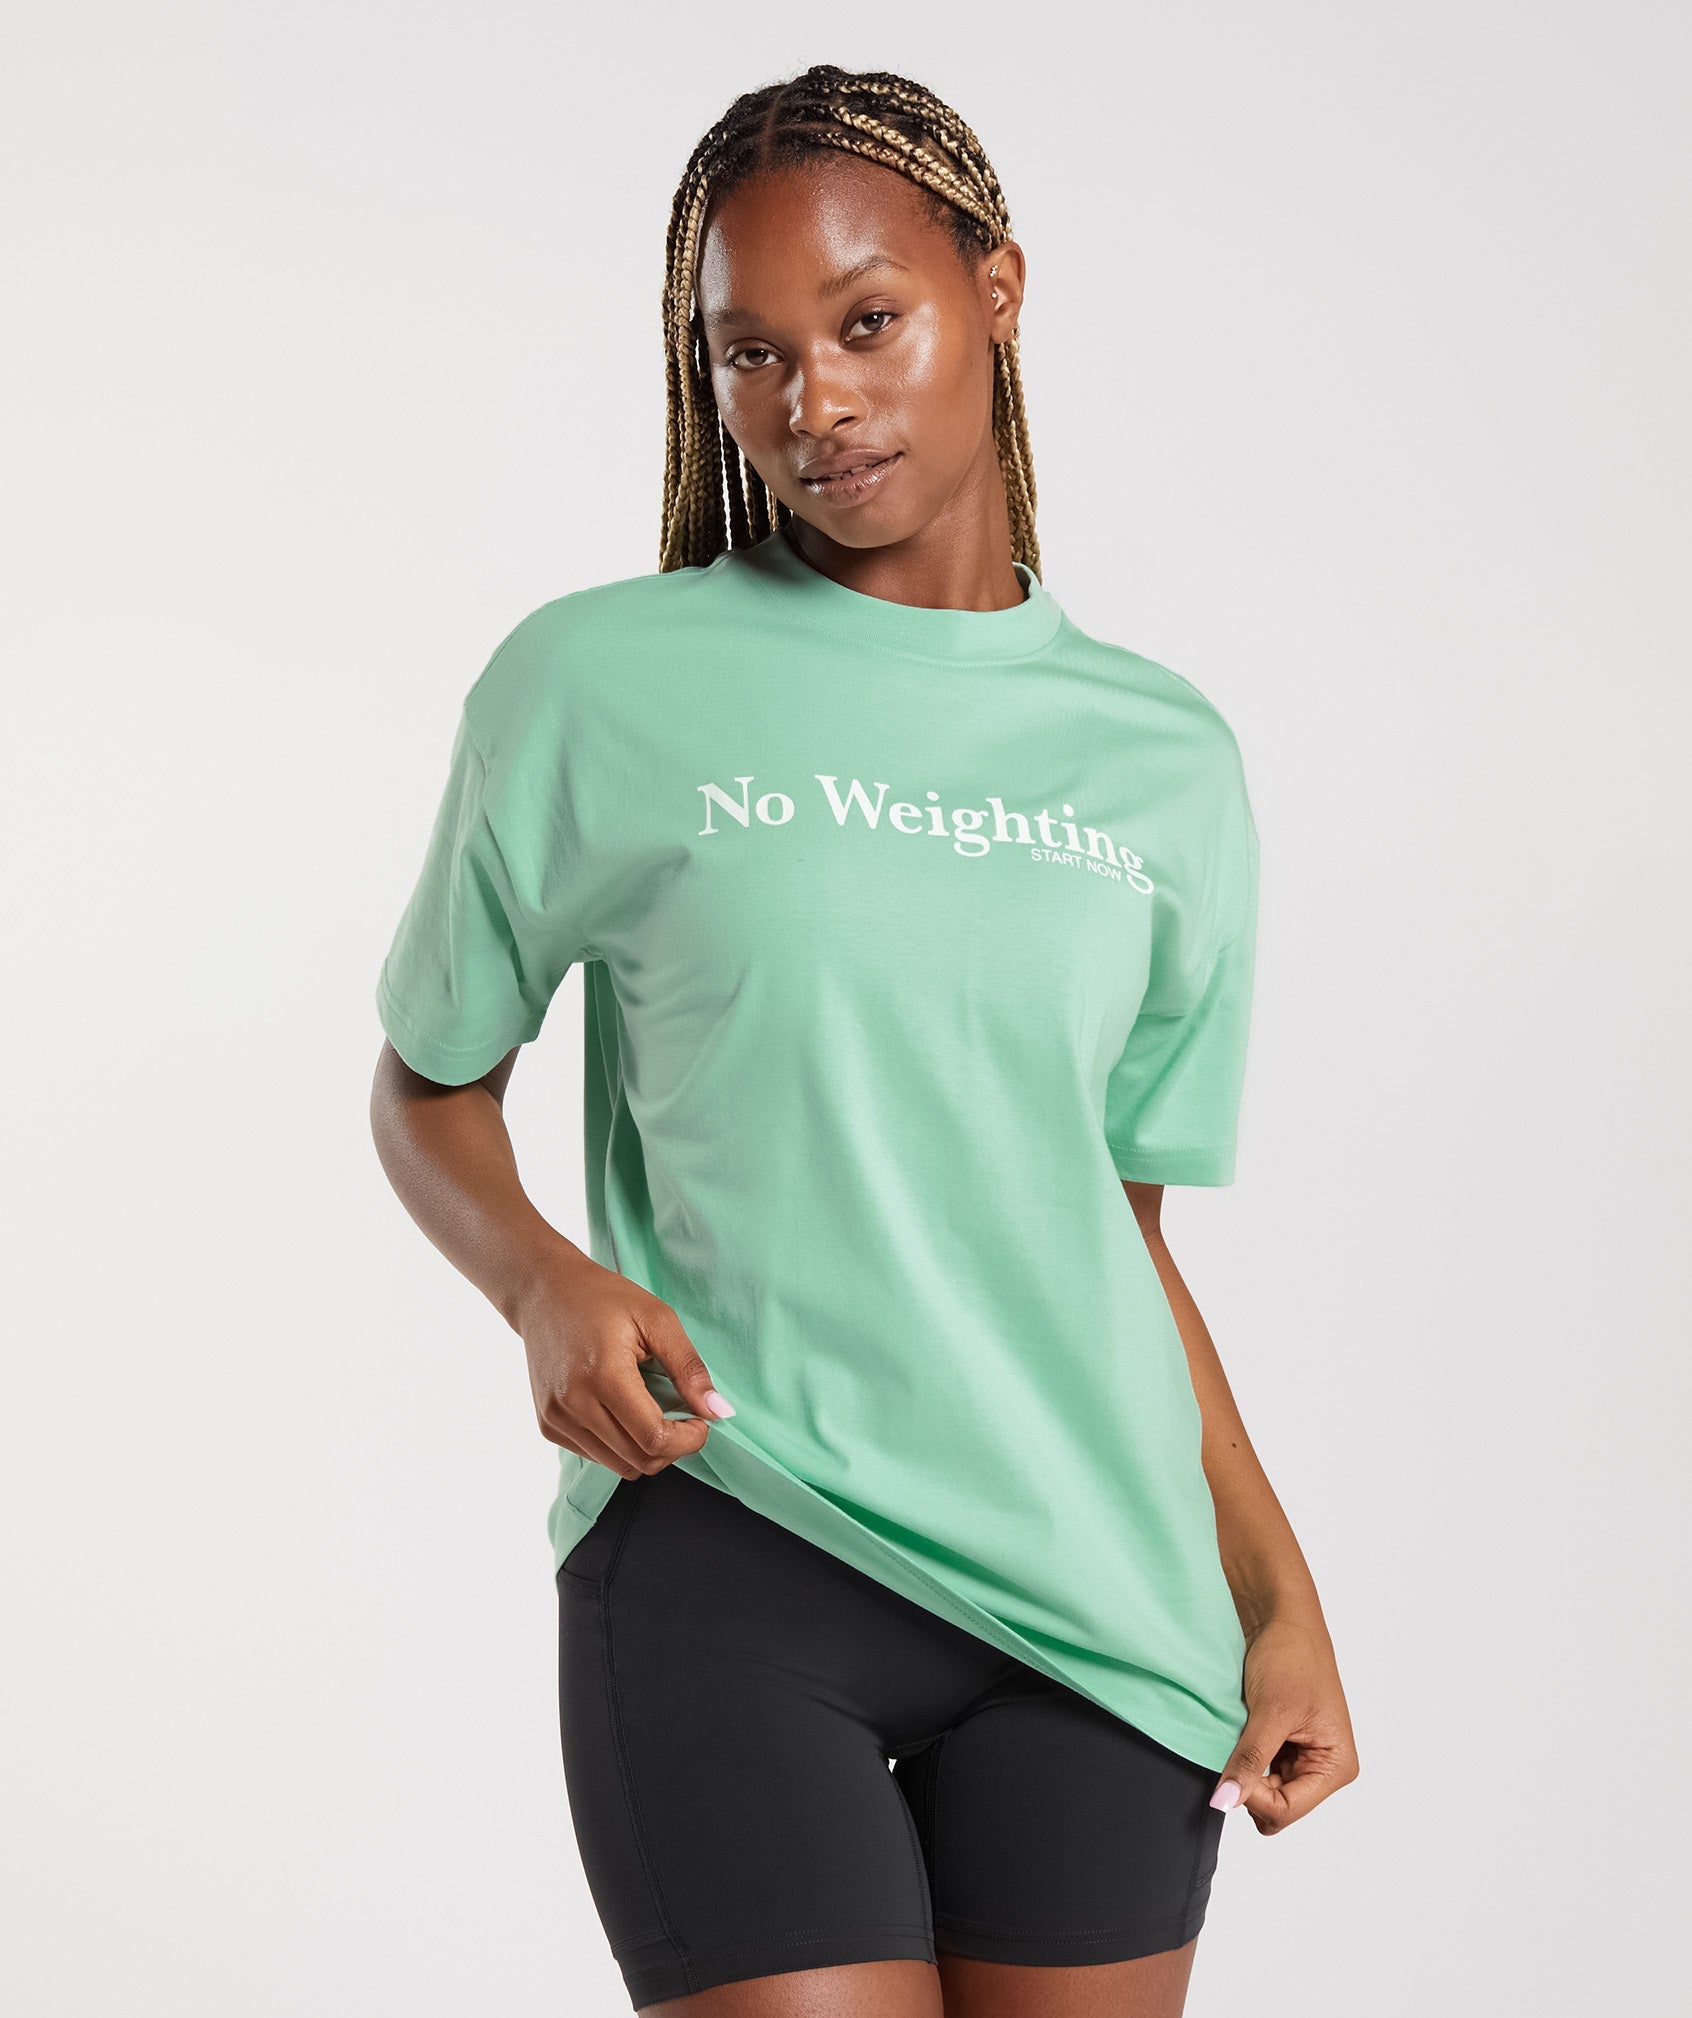 No Weighting Oversized T-Shirt in Pastel Green